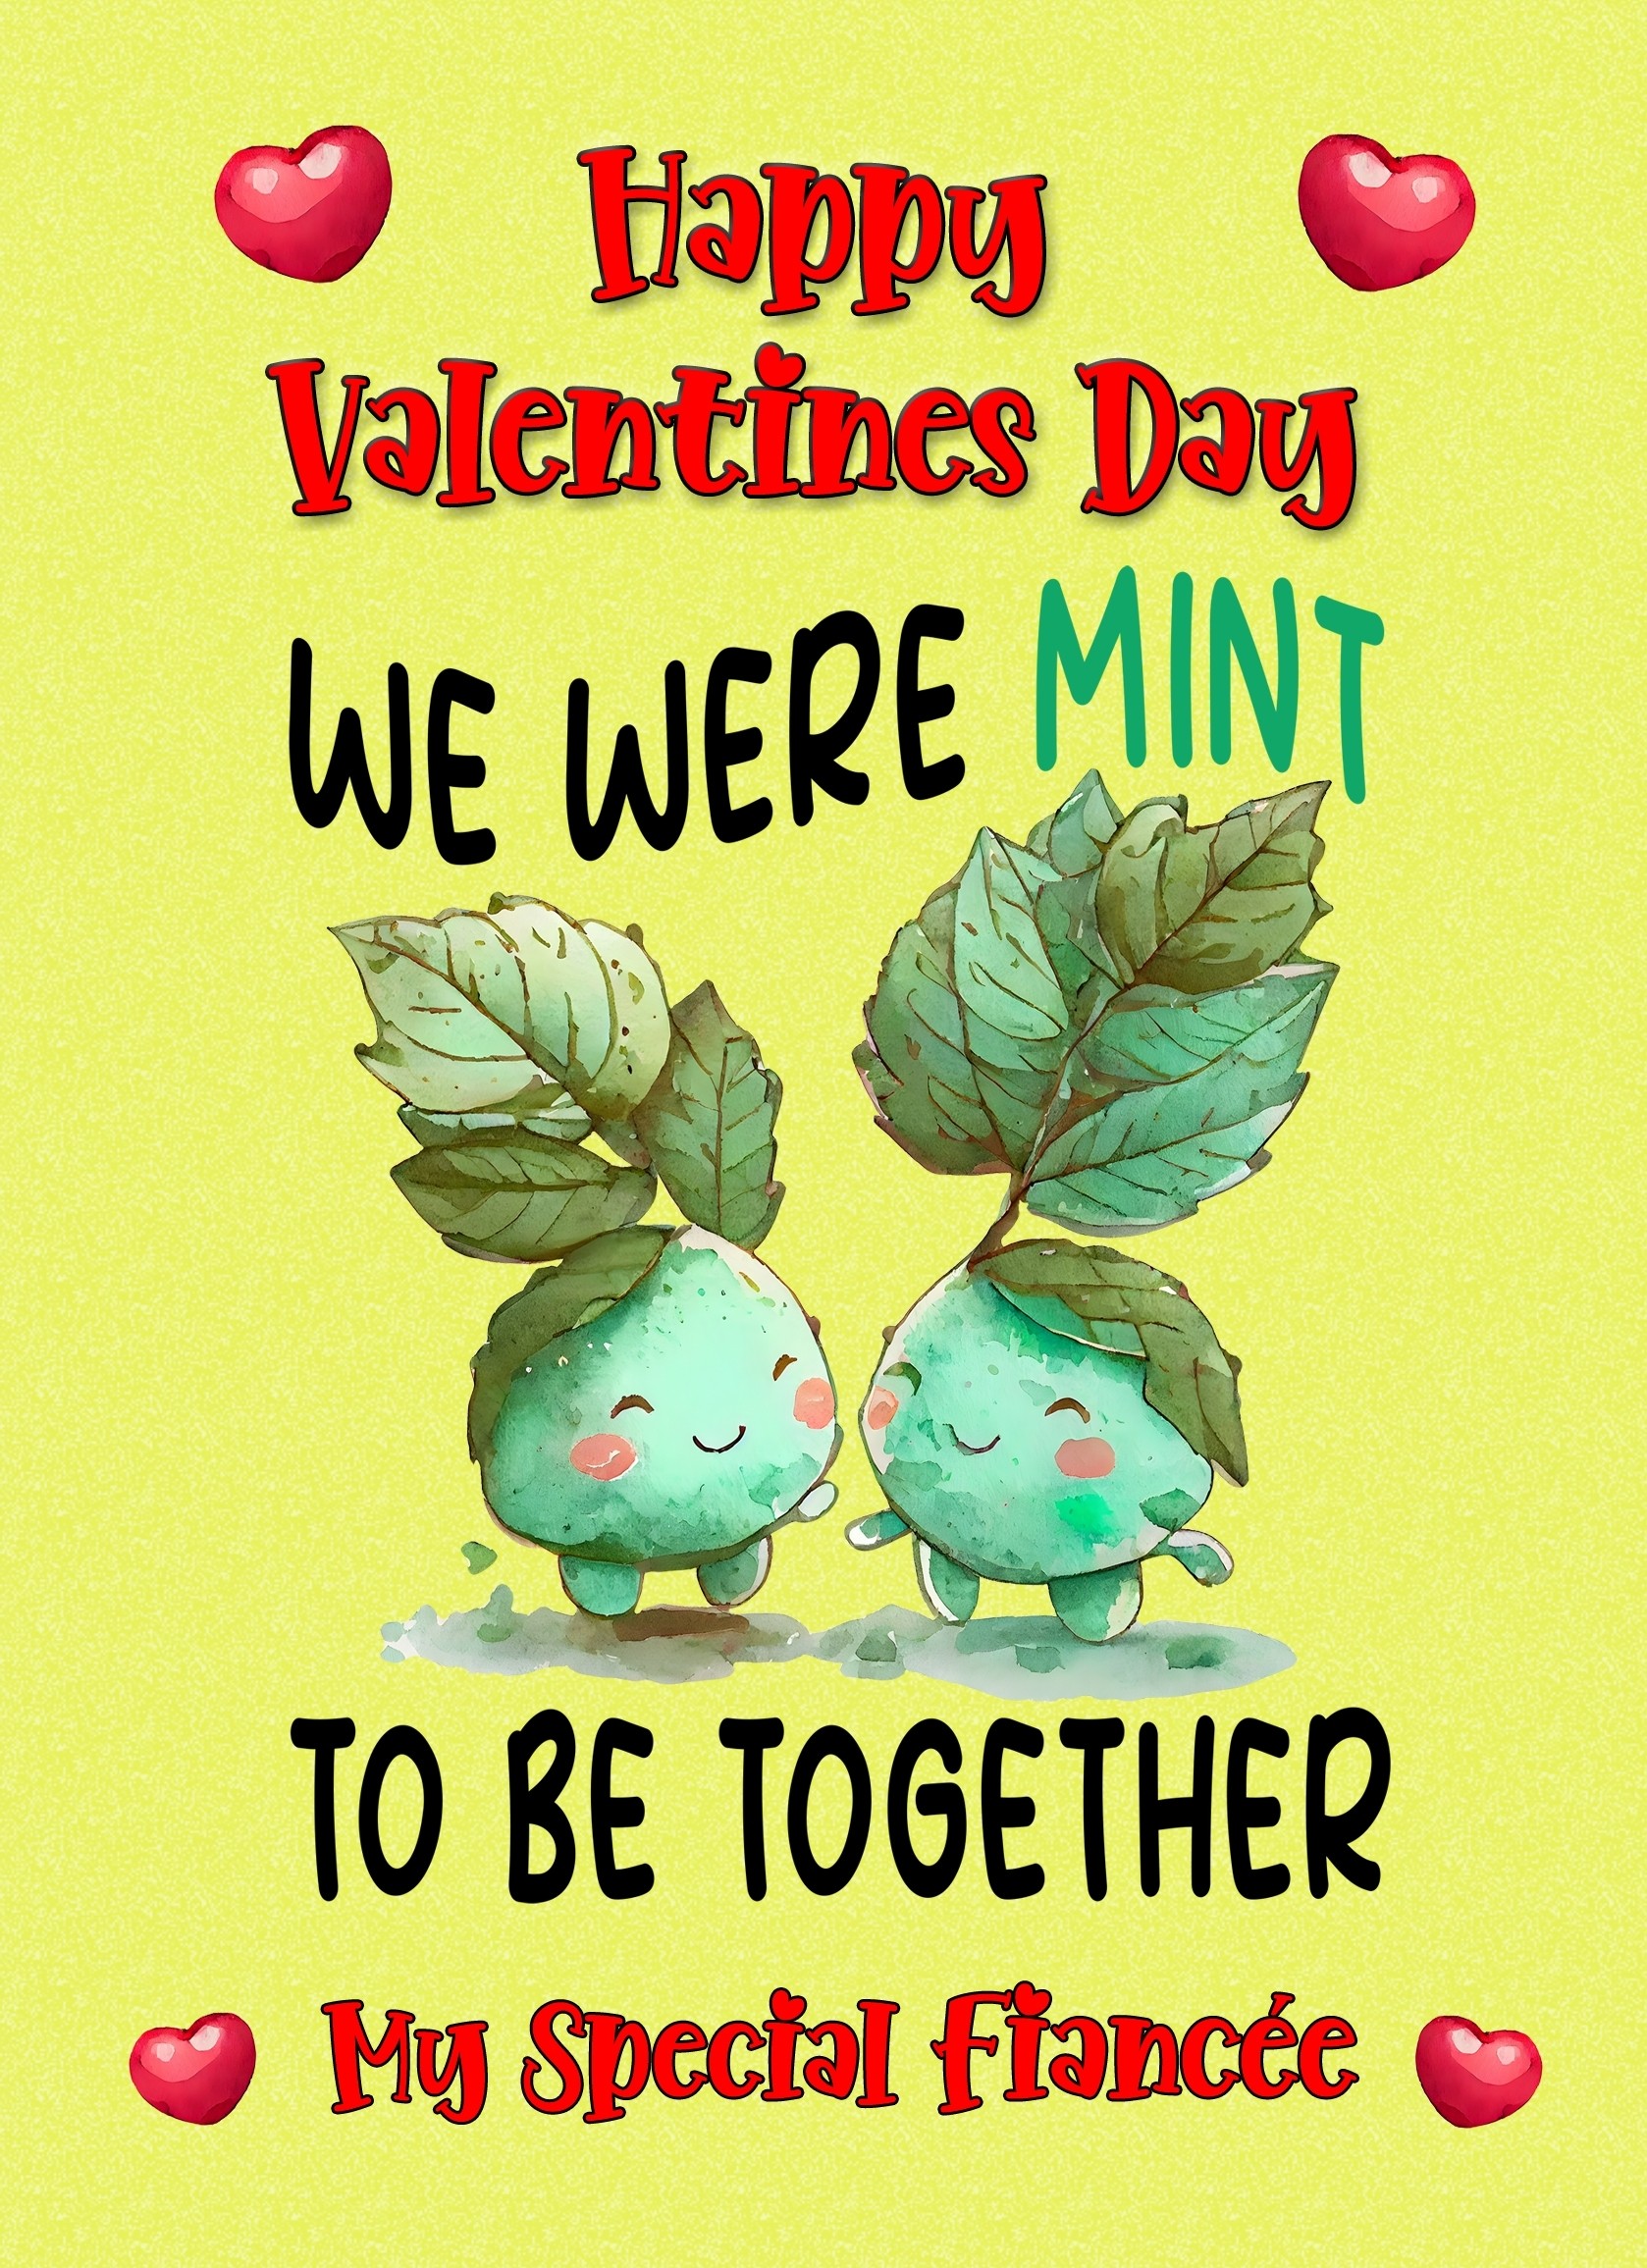 Funny Pun Valentines Day Card for Fiancee (Mint to Be)